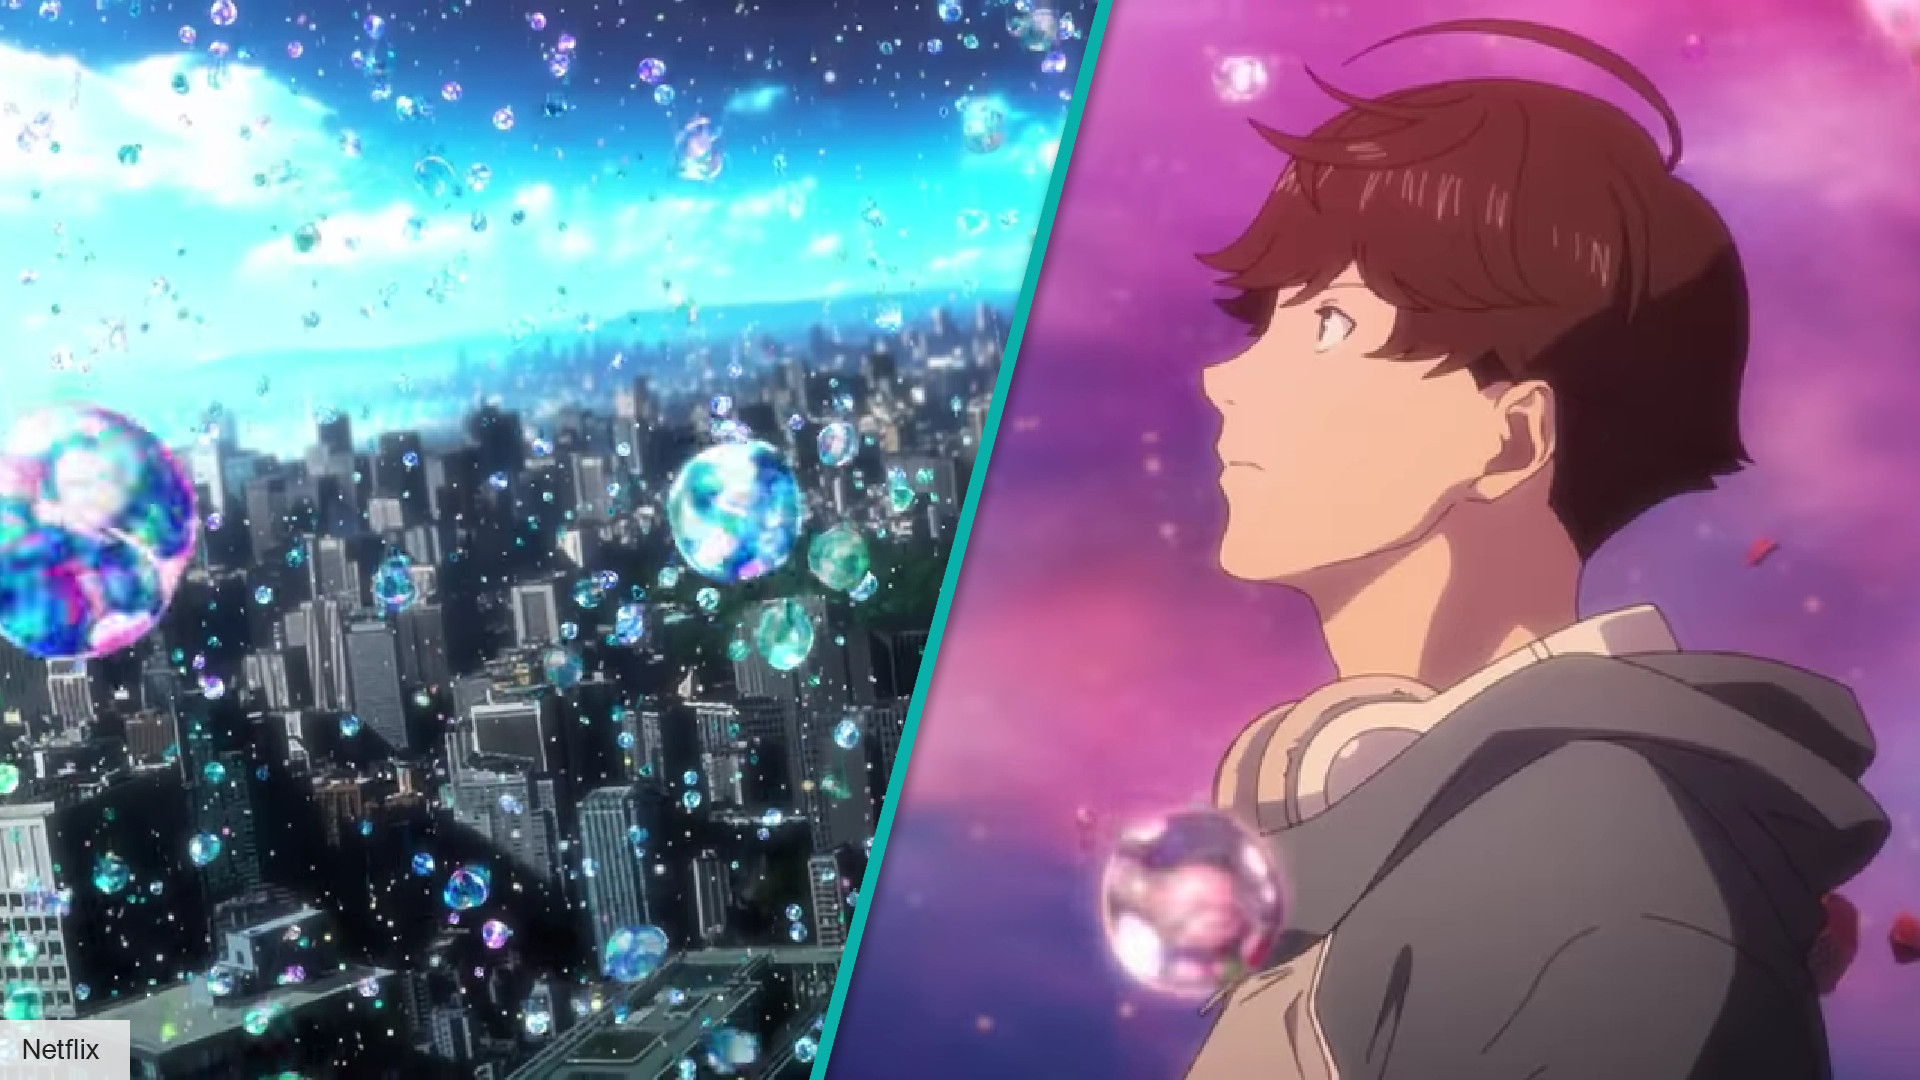 Netflix Announces Bubble Anime Film For Next Year With GravityDefying  Trailer  That Hashtag Show